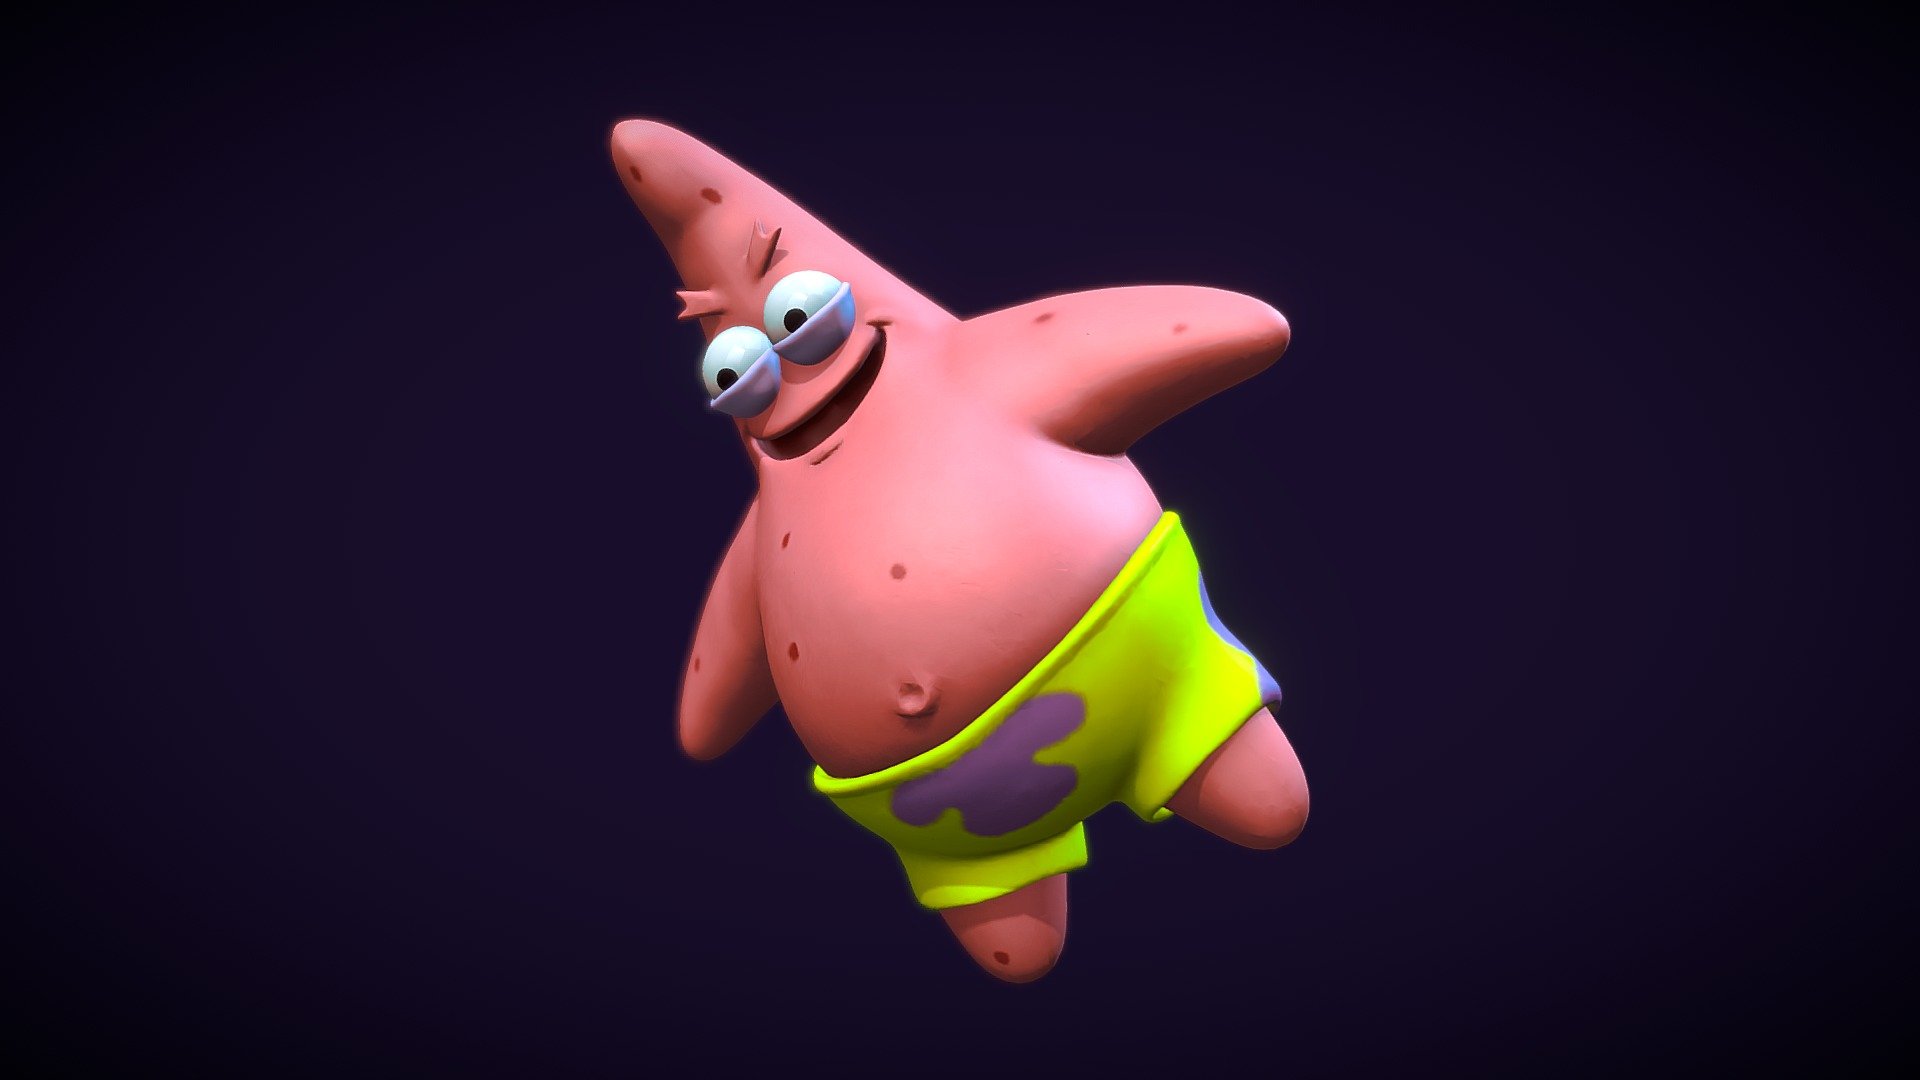 Patrick from Spongebob Squarepants sculpted in VR with Oculus Medium - Day 31 of SculptJanuary 2019: Extreme Expression - 3D model by illuminatty (@nattyice) 3d model